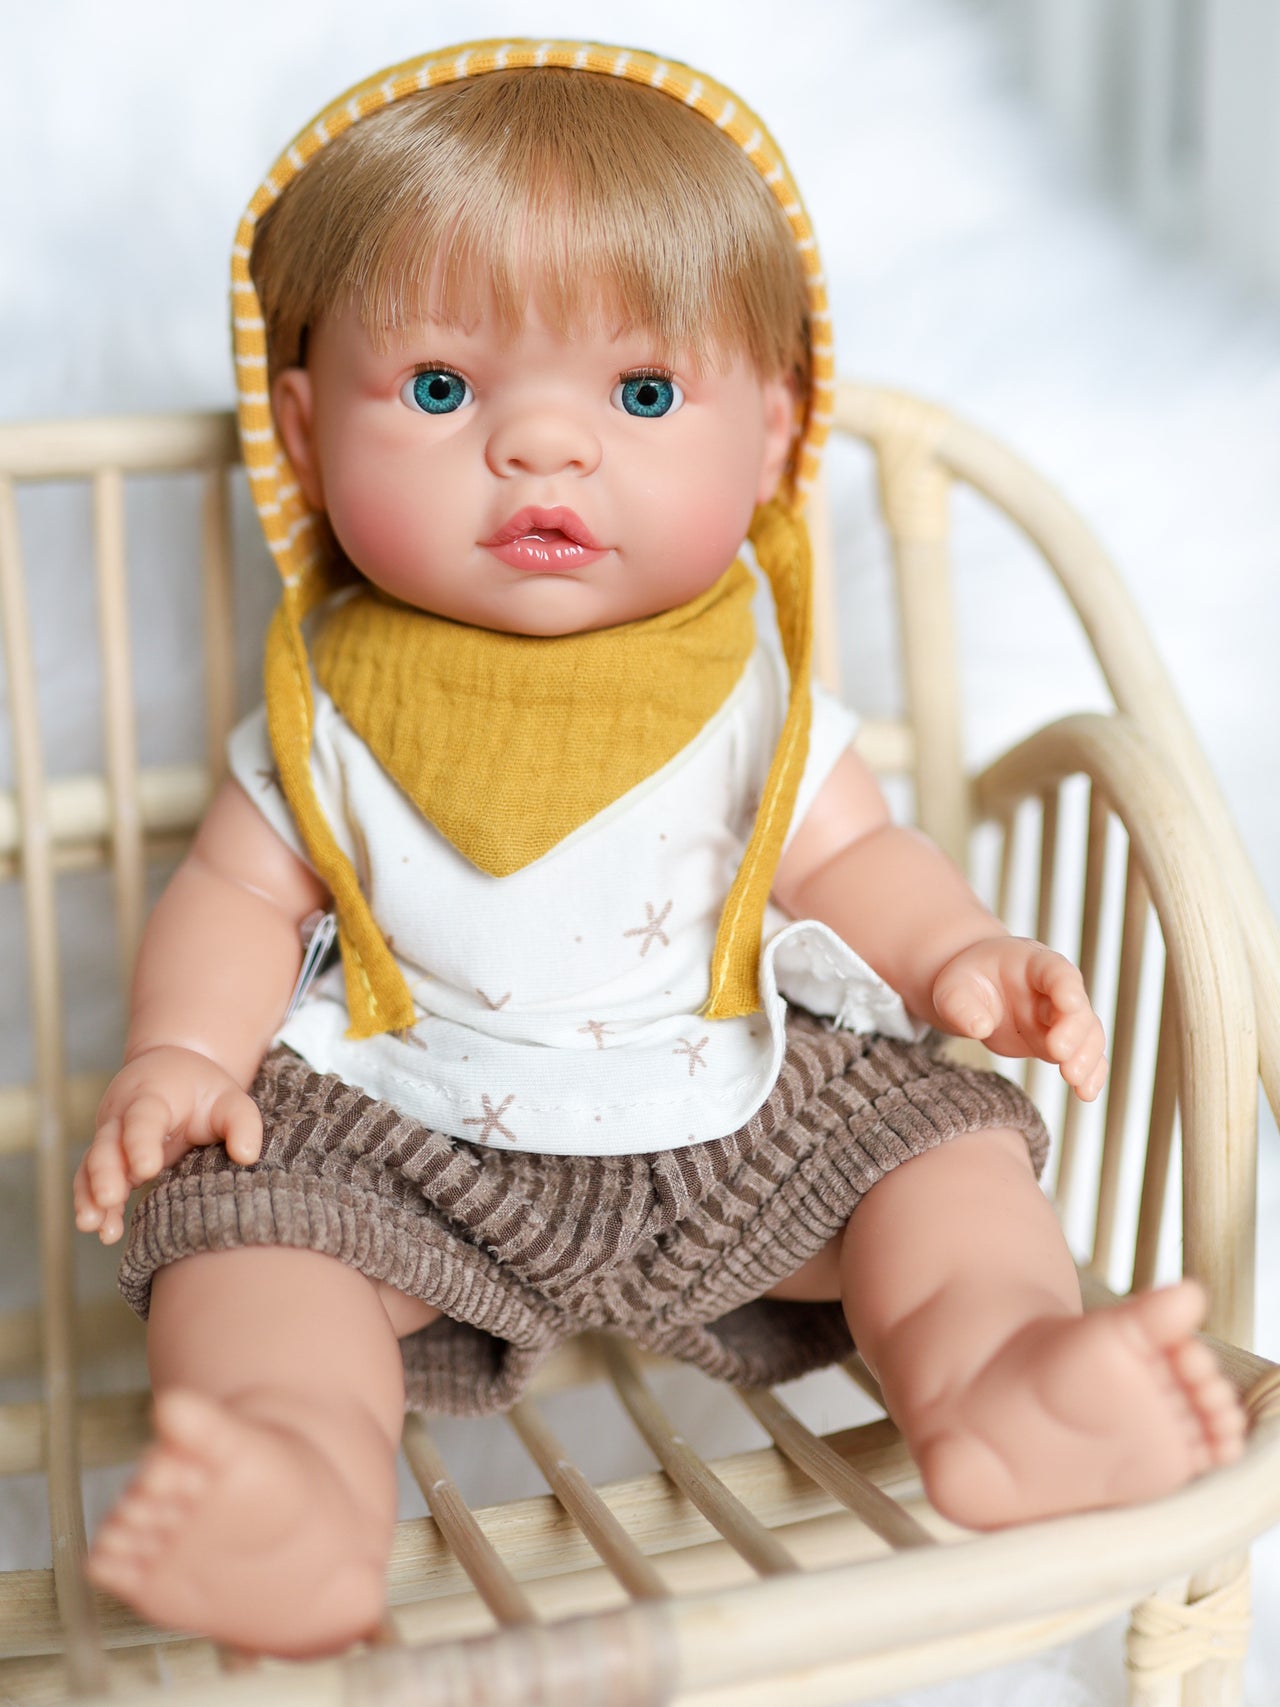 Ben - Fully Dressed Joy Collection Boy Doll with Blonde Hair